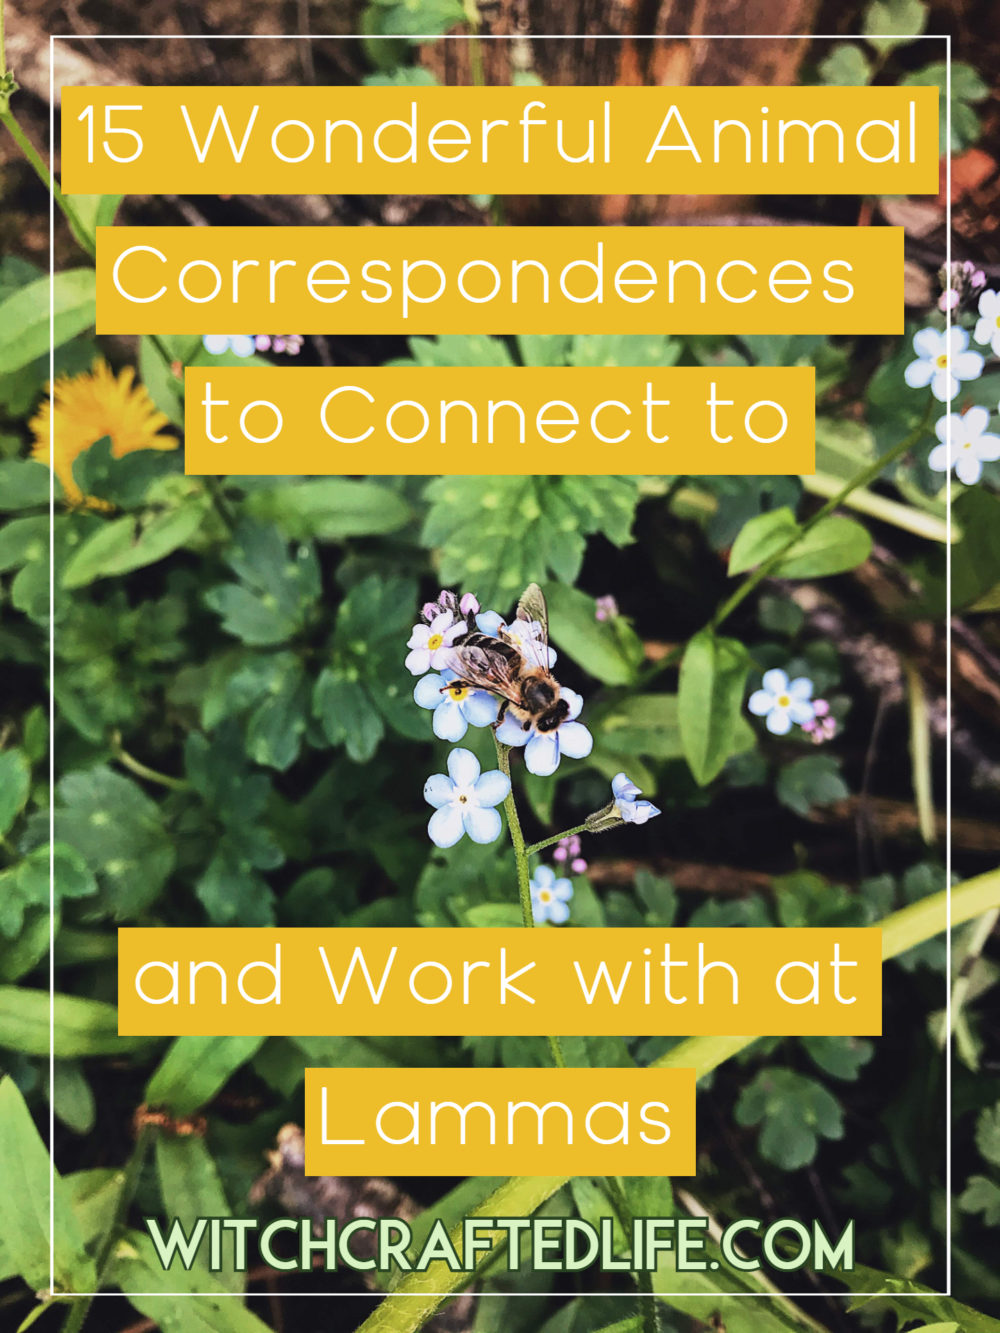 15 Wonderful Animal Correspondences to Connect to and Work with at Lammas